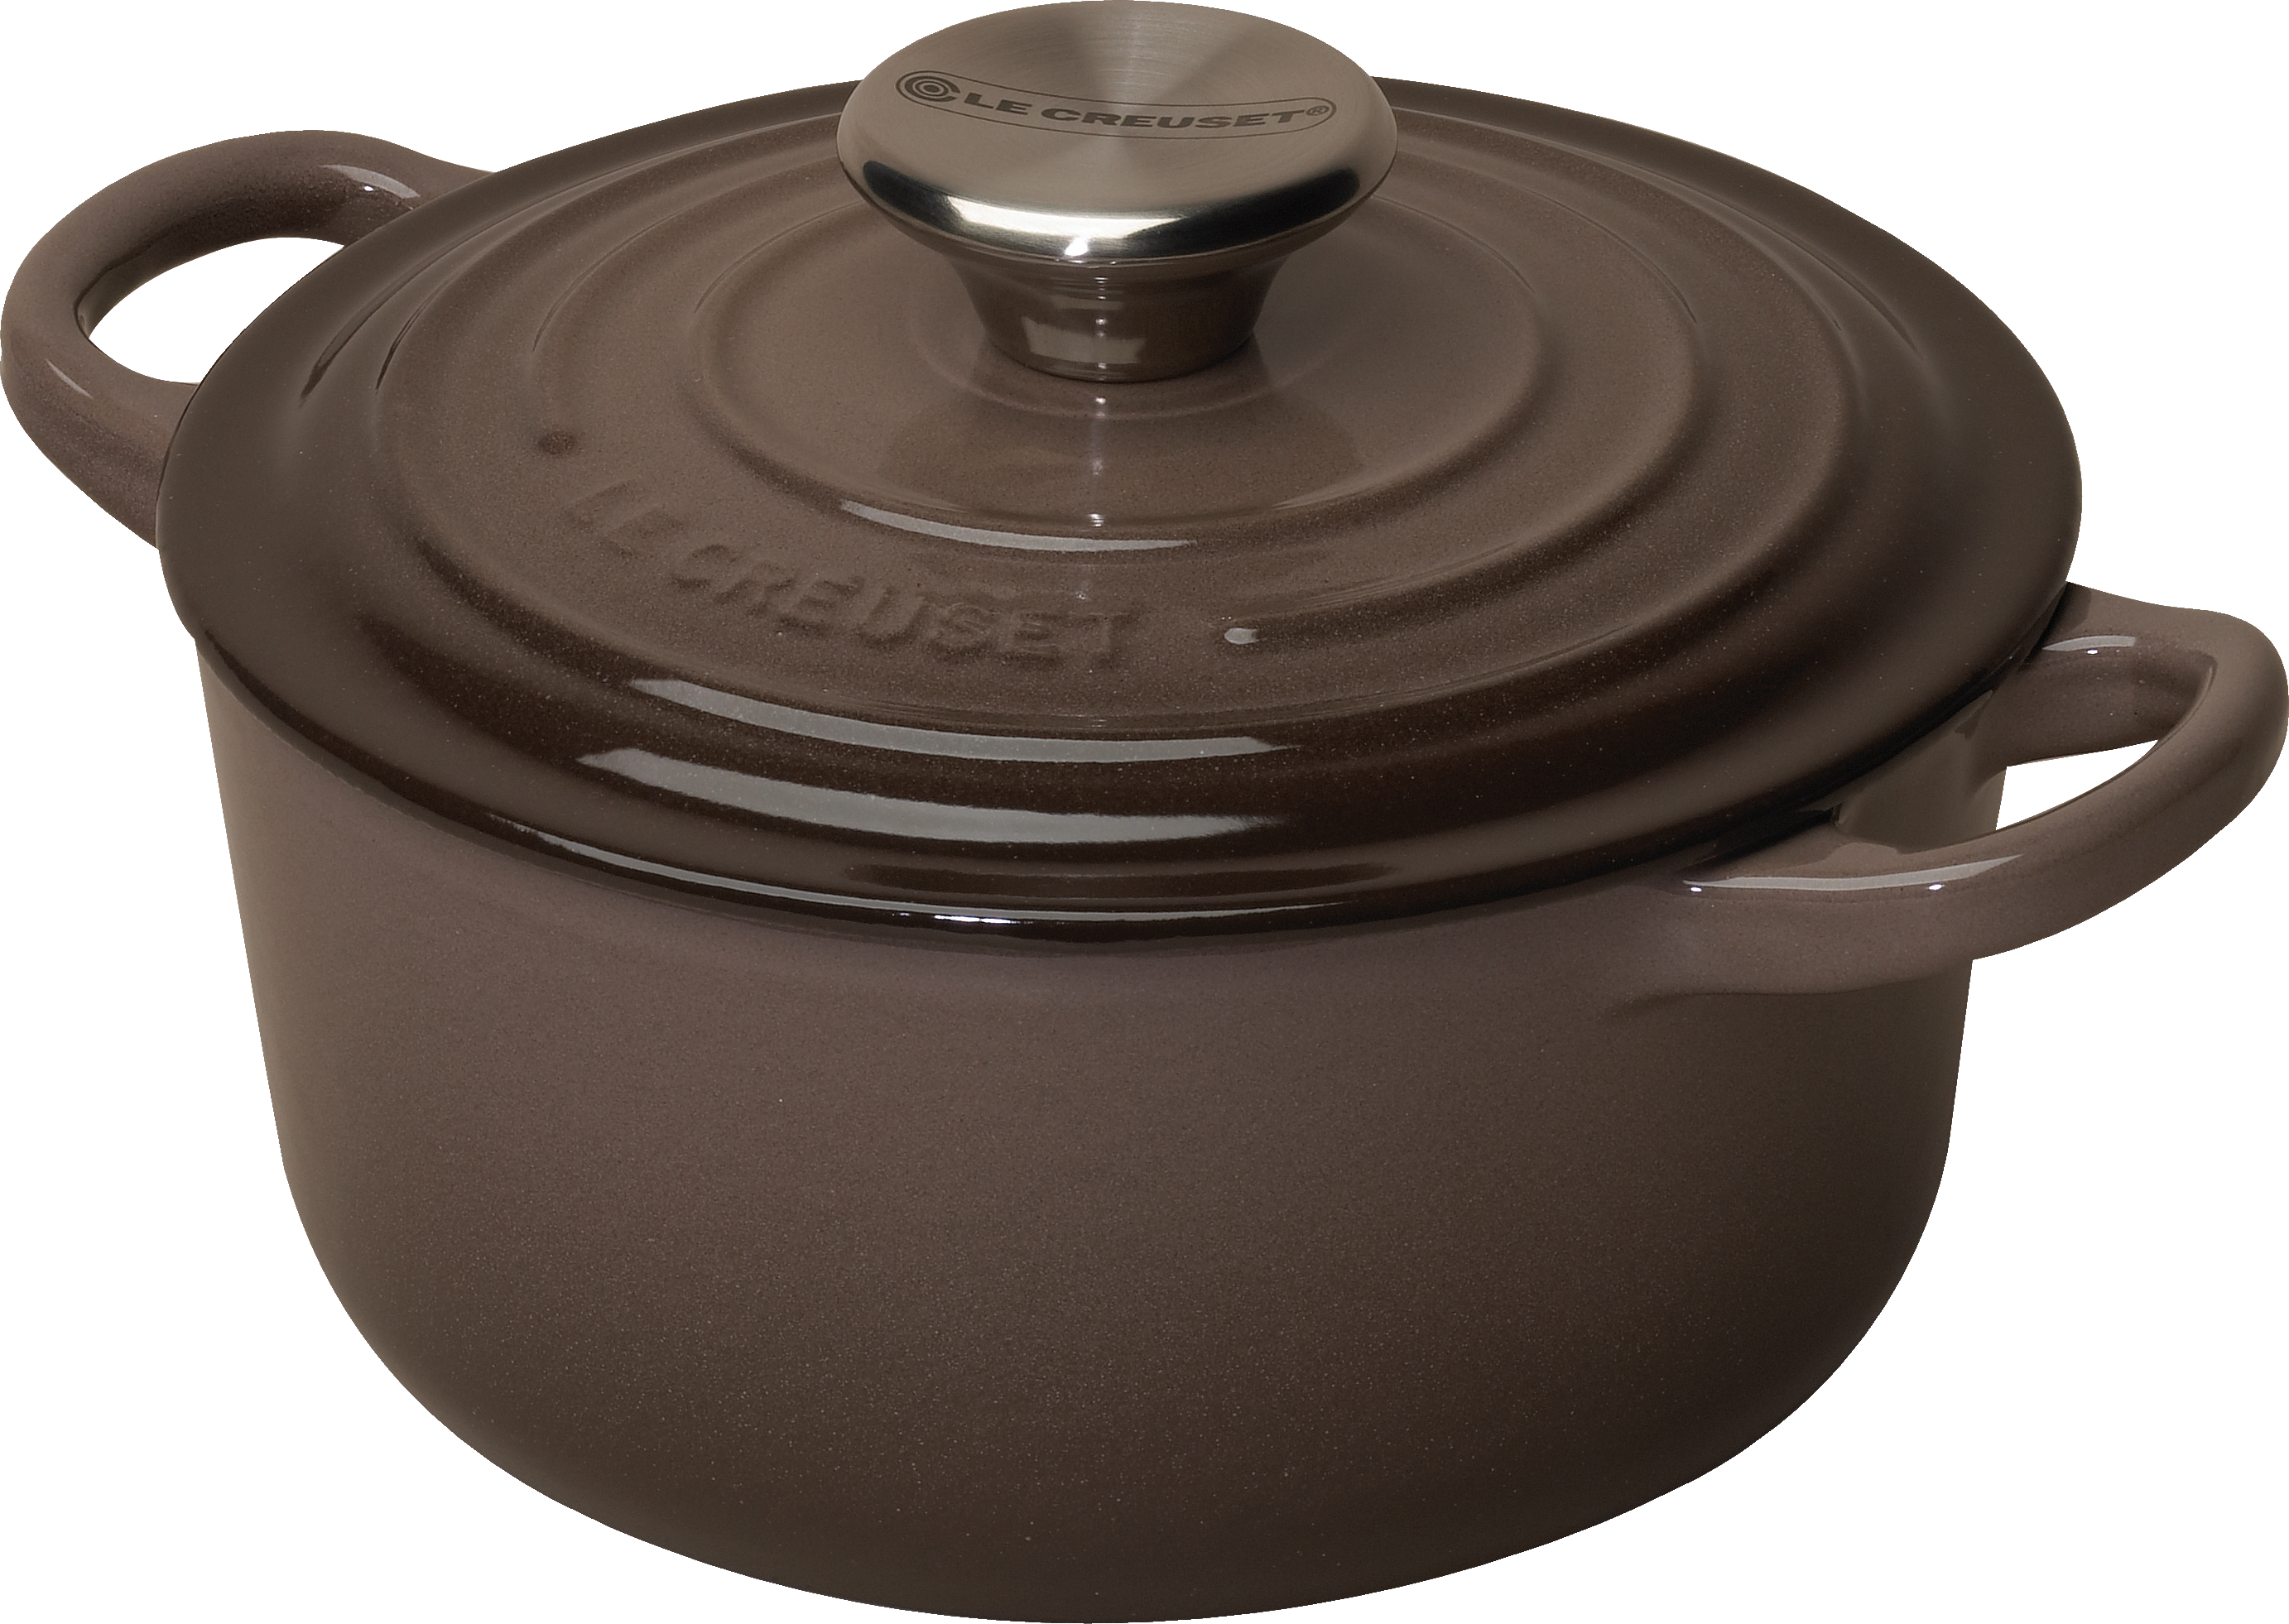 Cooking pan PNG images Download 